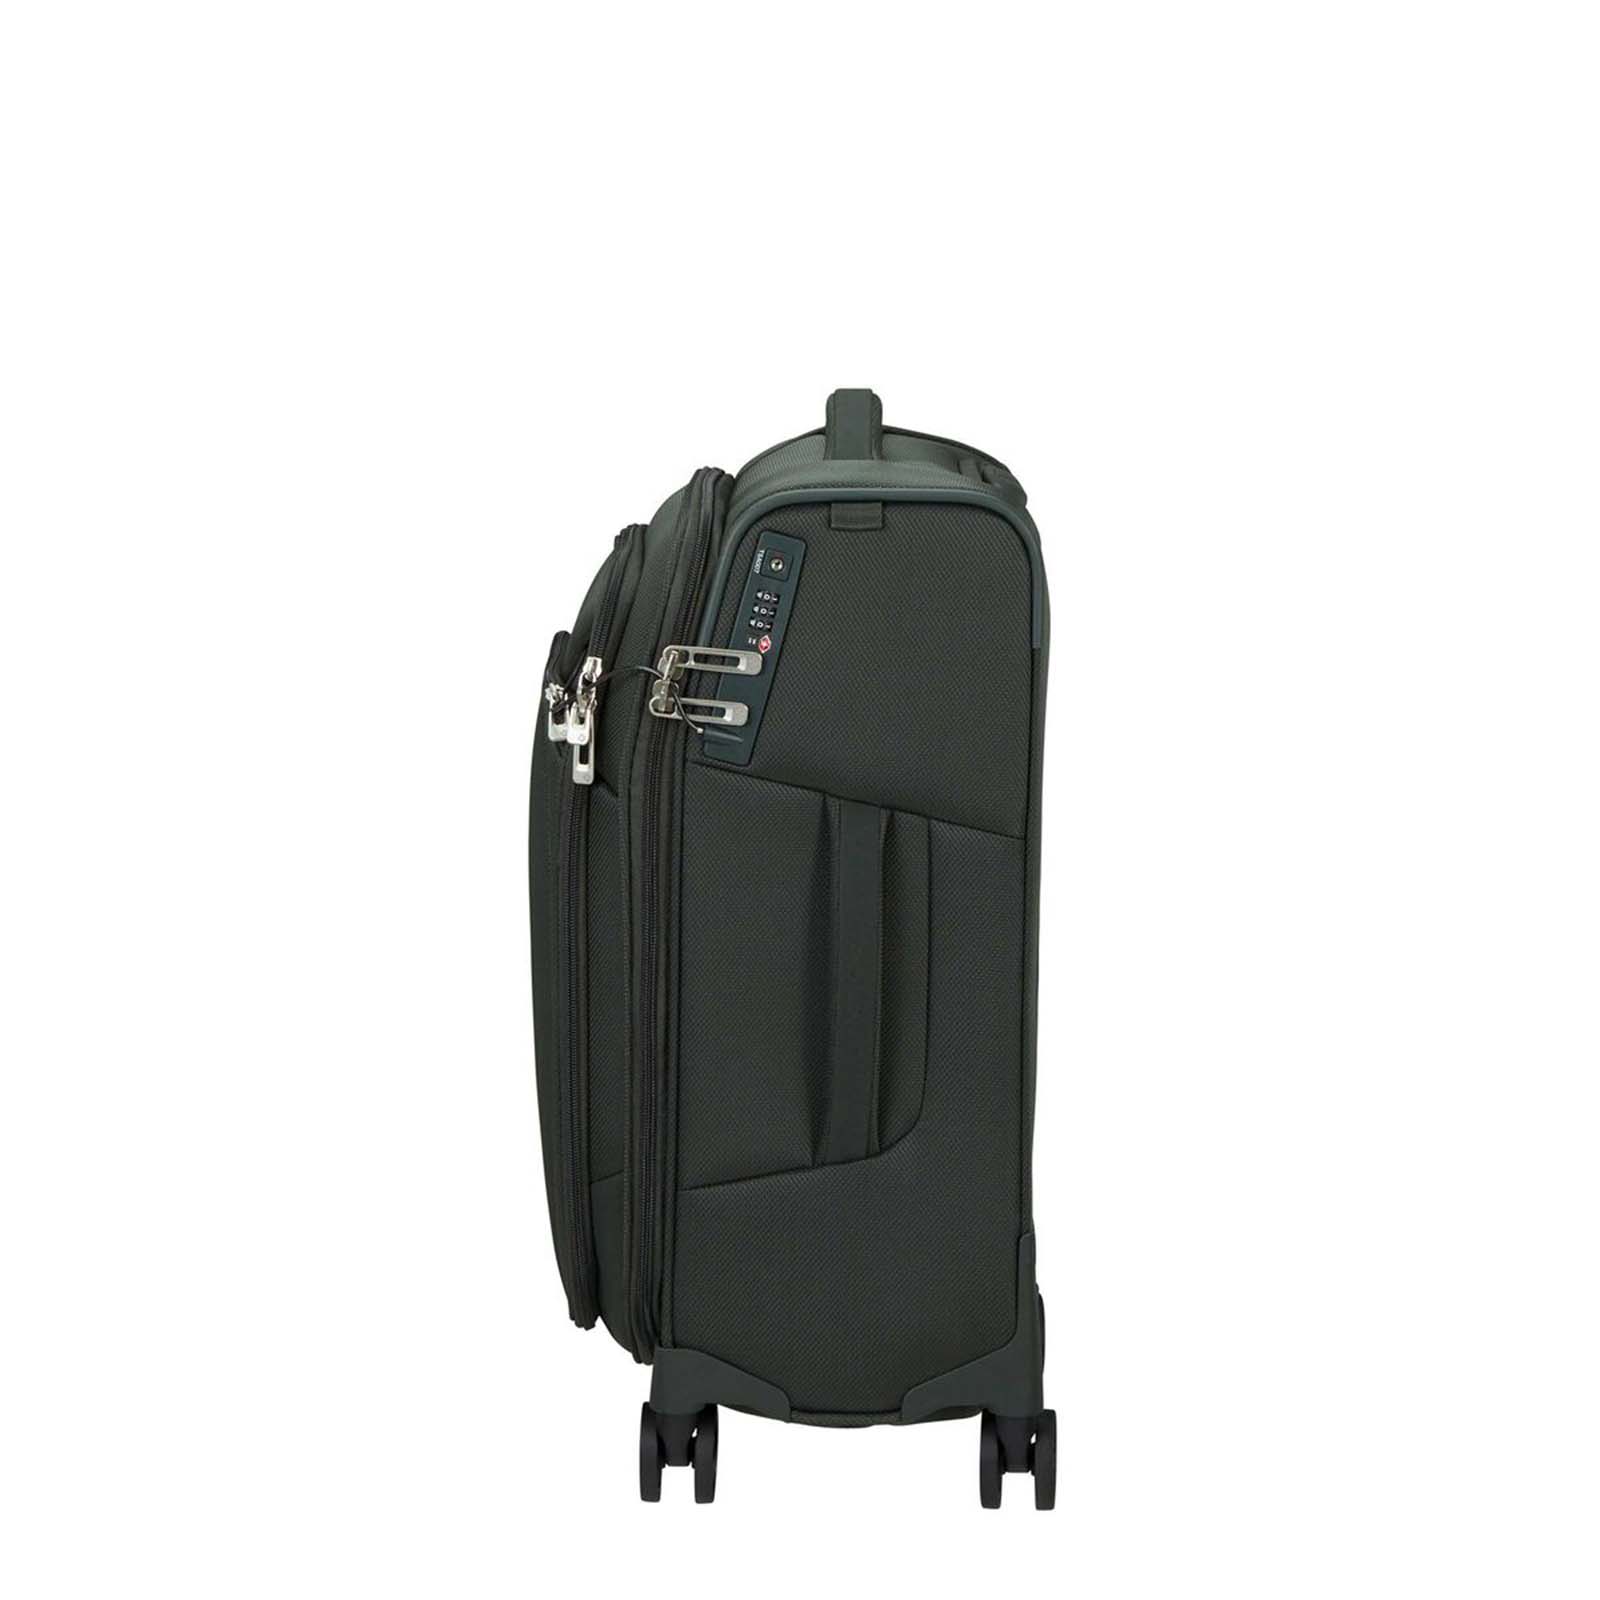 Samsonite-Respark-55cm-Carry-On-Suitcase-Forest-Green-Handle